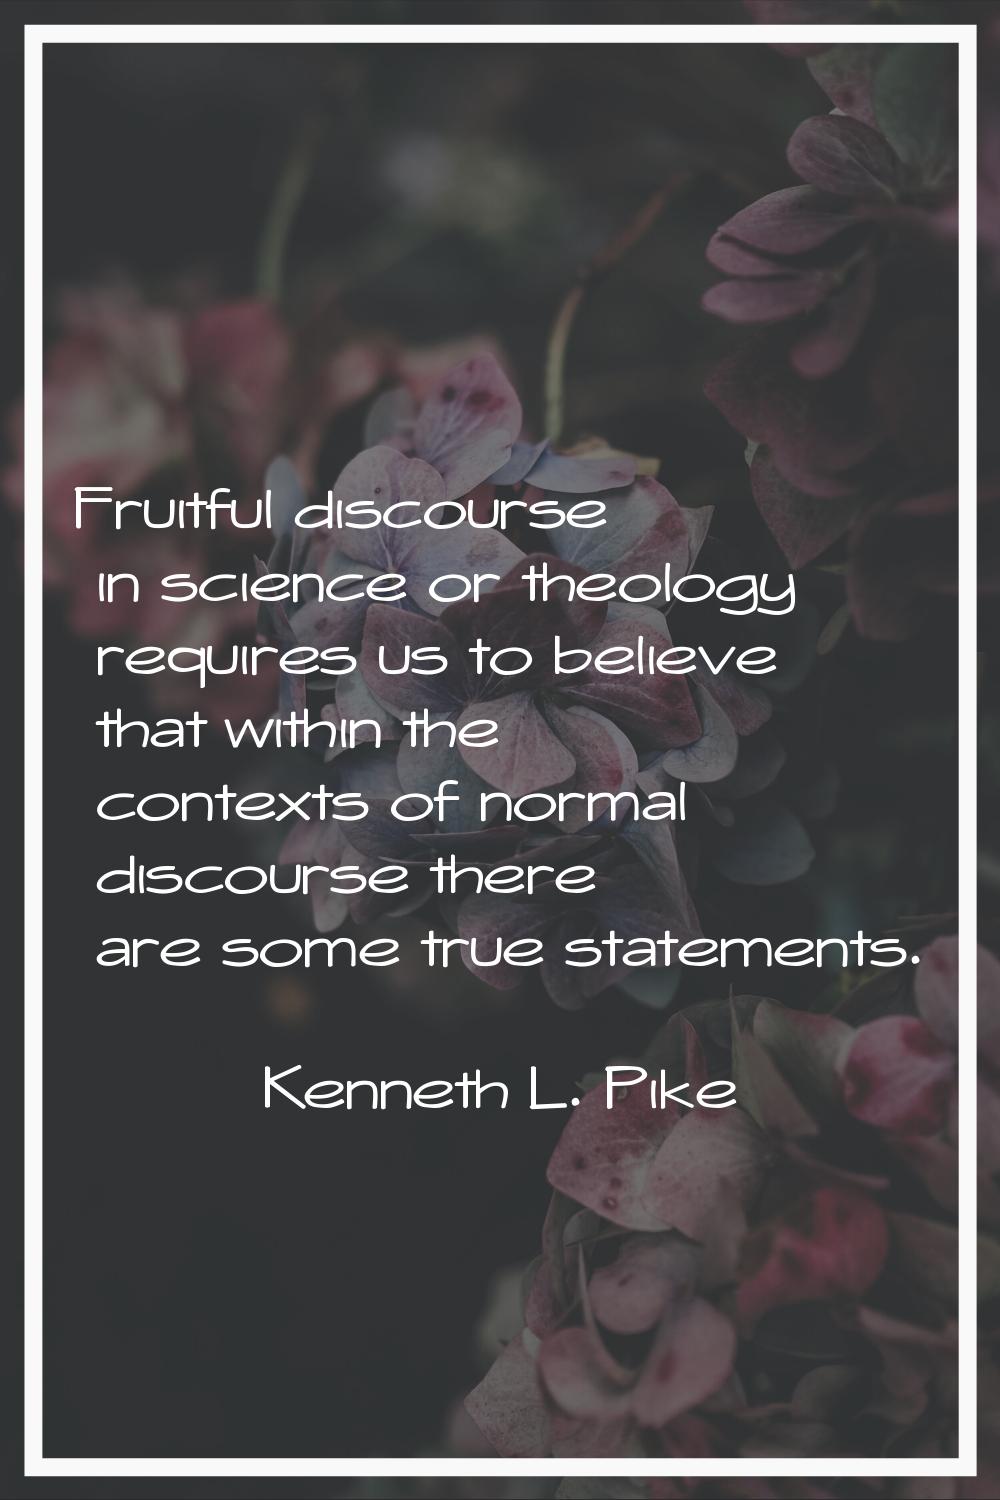 Fruitful discourse in science or theology requires us to believe that within the contexts of normal